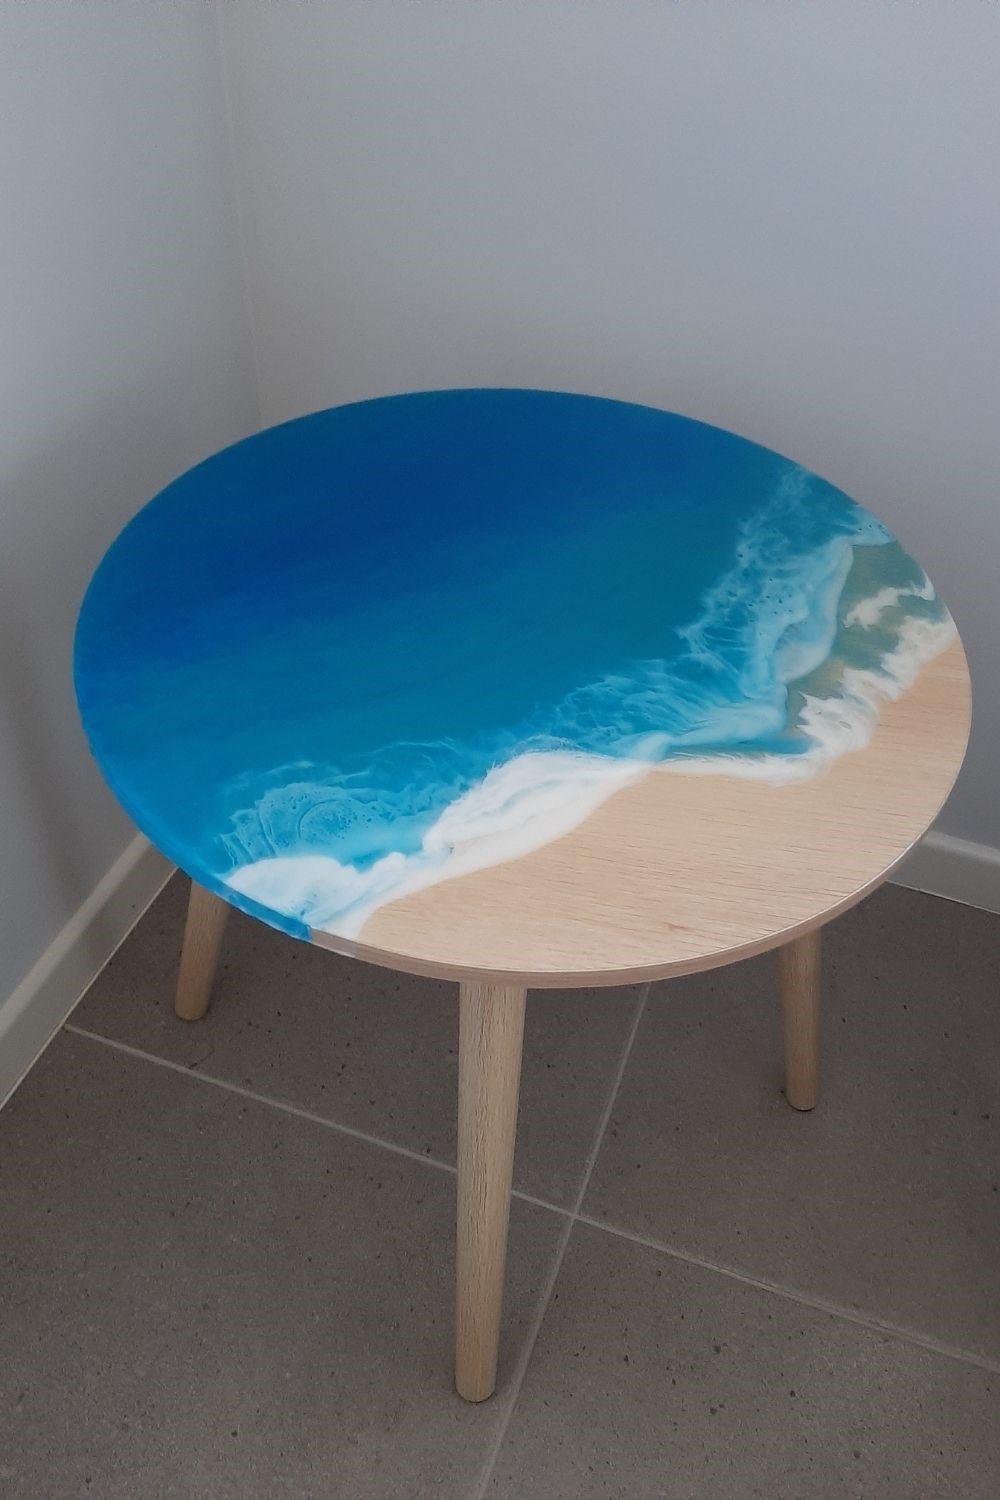 Kmart hack: How to transform a table with resin paint | Better Homes